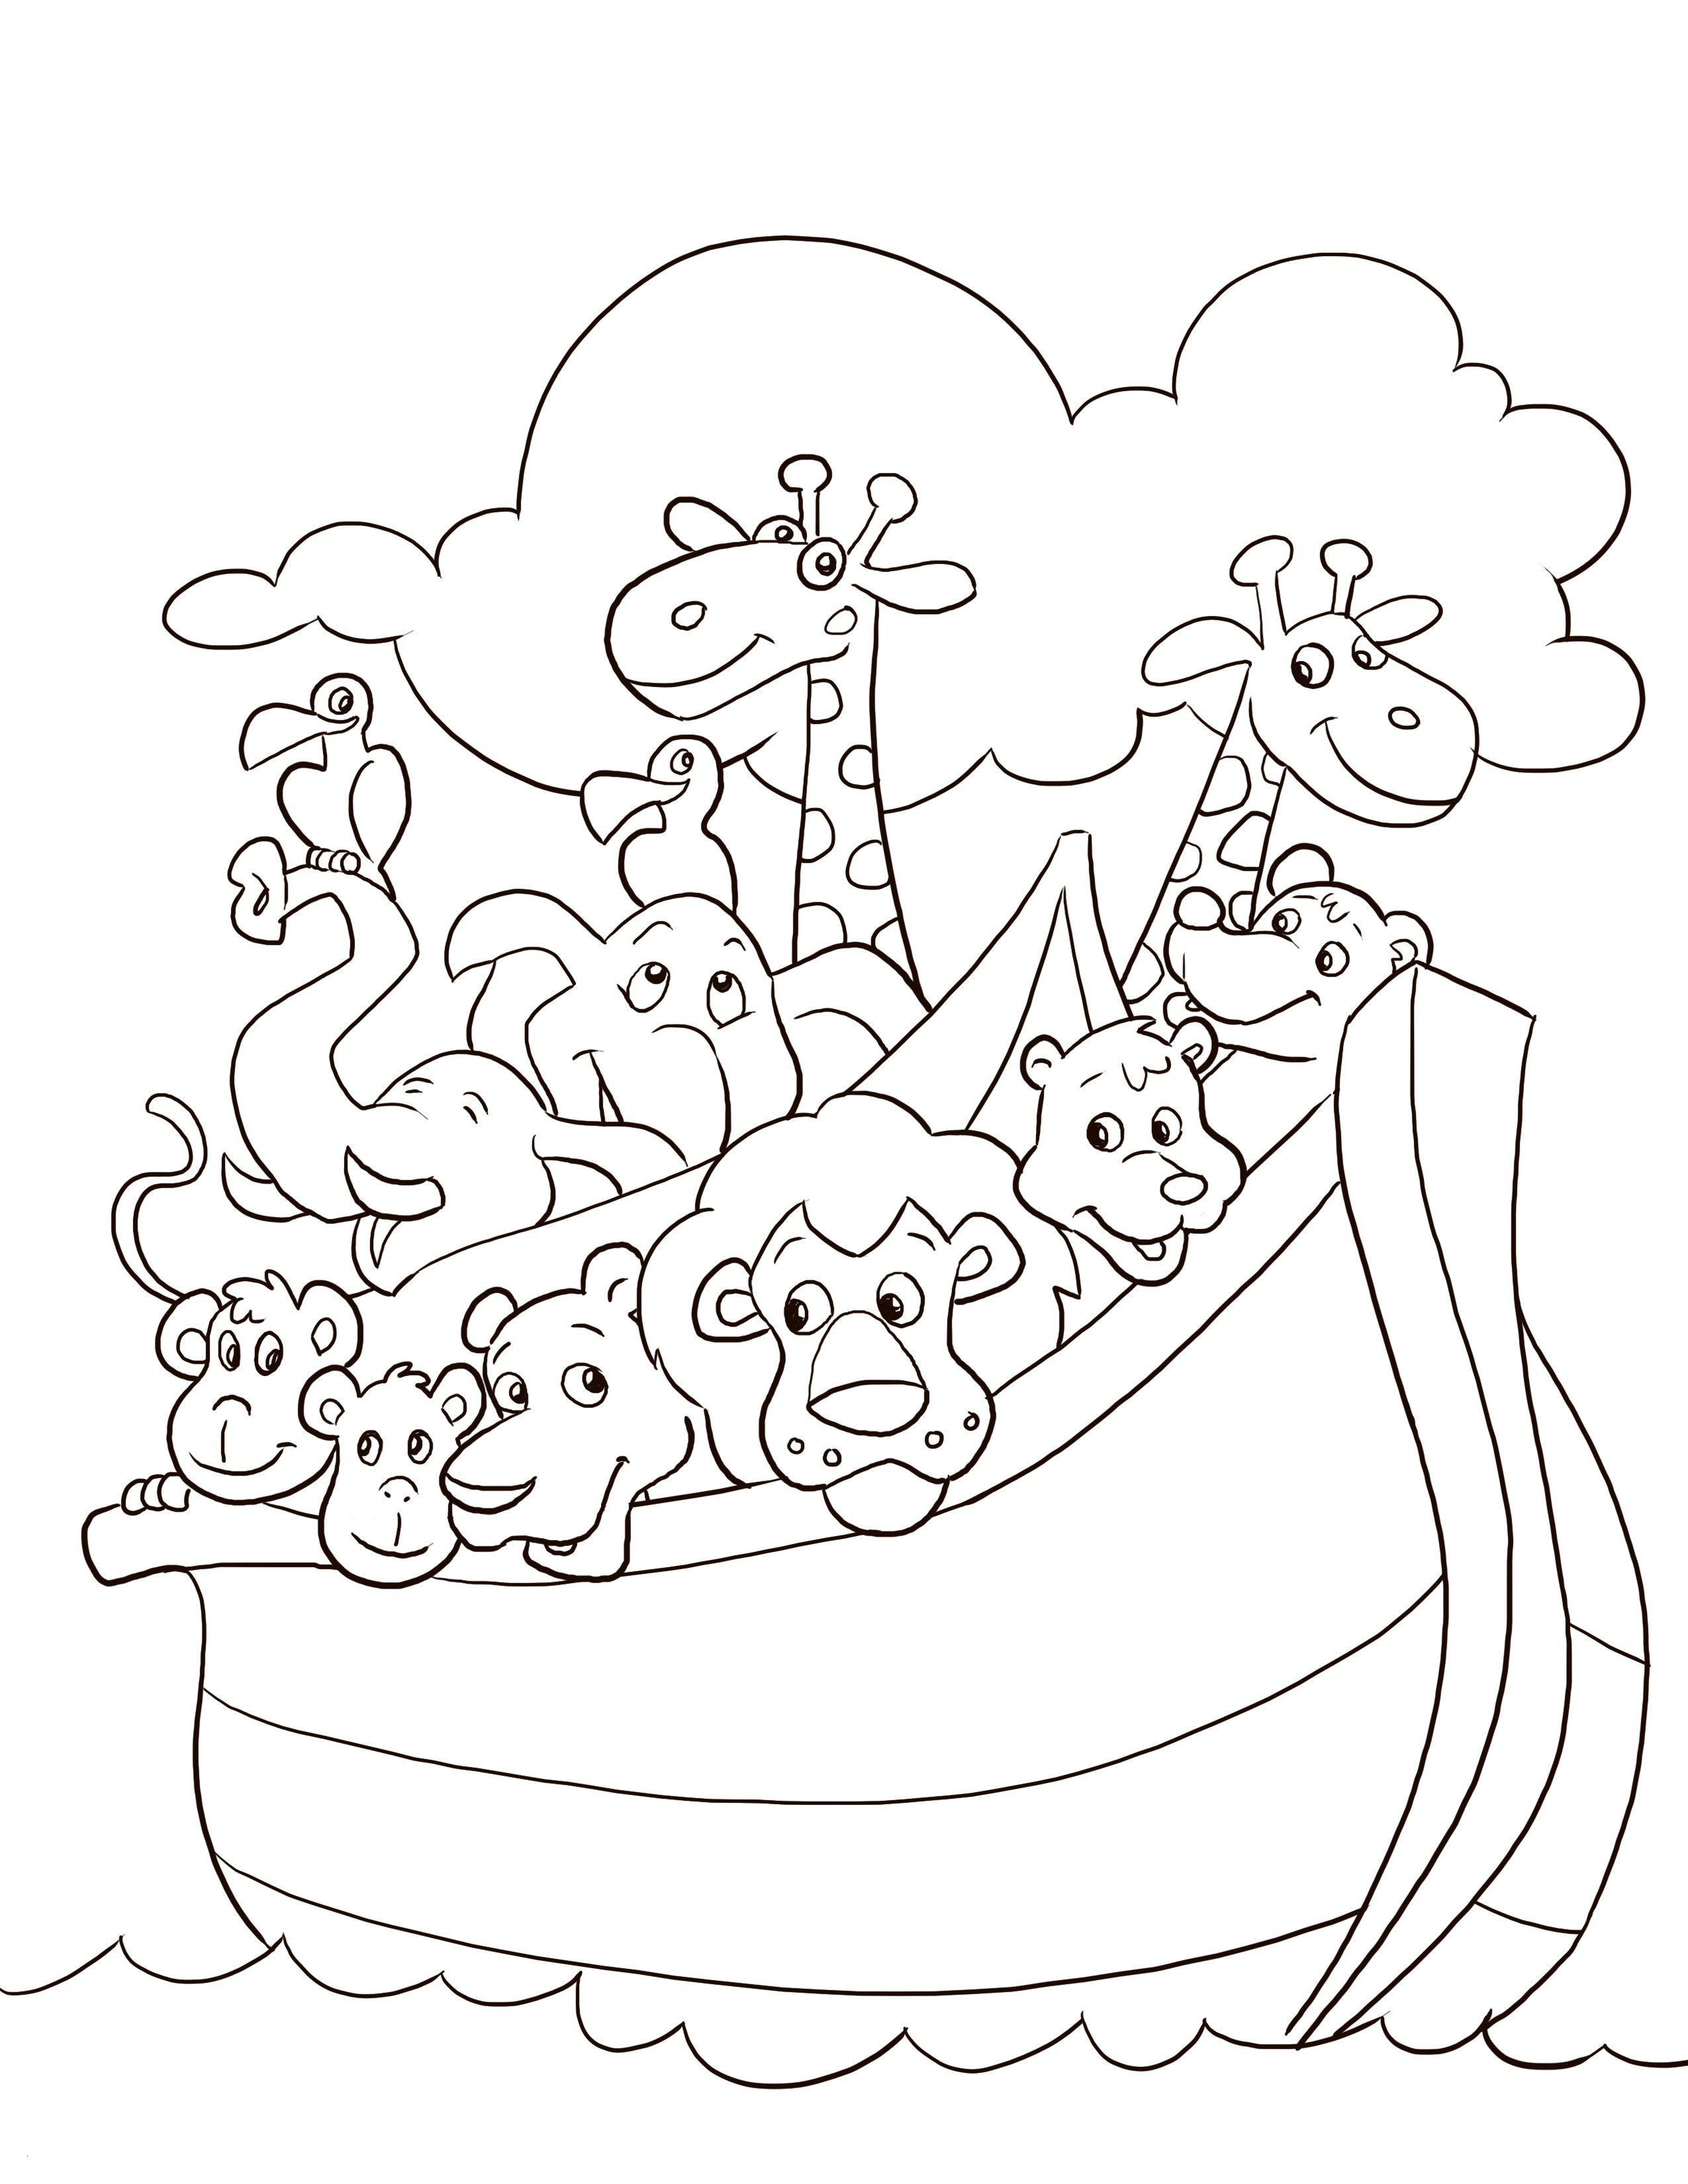 Christian Coloring Pages For Kids | Teamshania : Content - Free Printable Christian Coloring Pages